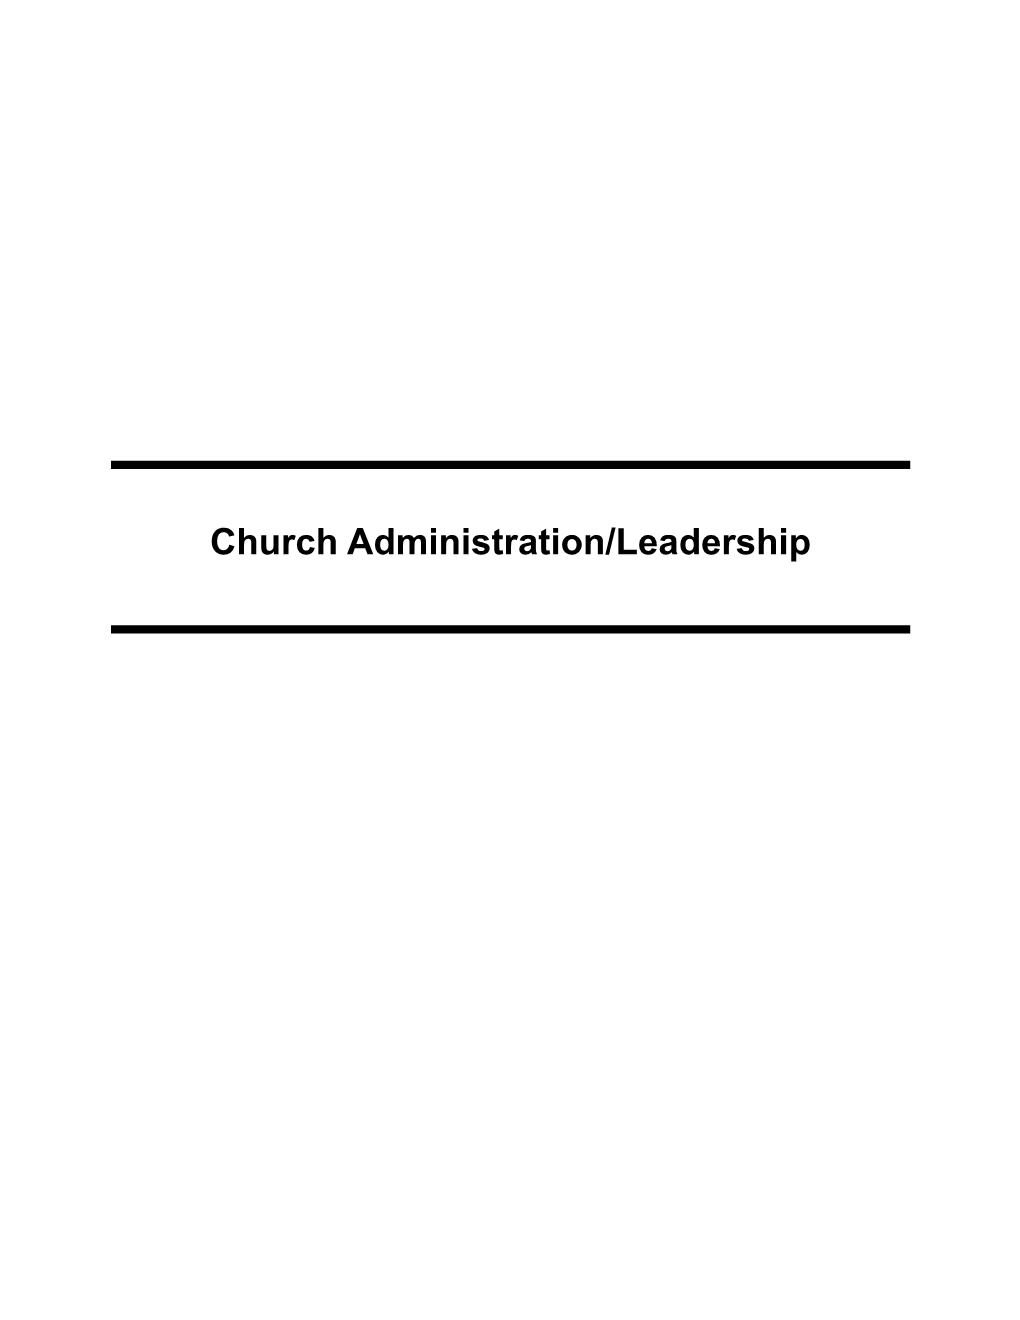 Church Administration Developing & Promoting the Vision